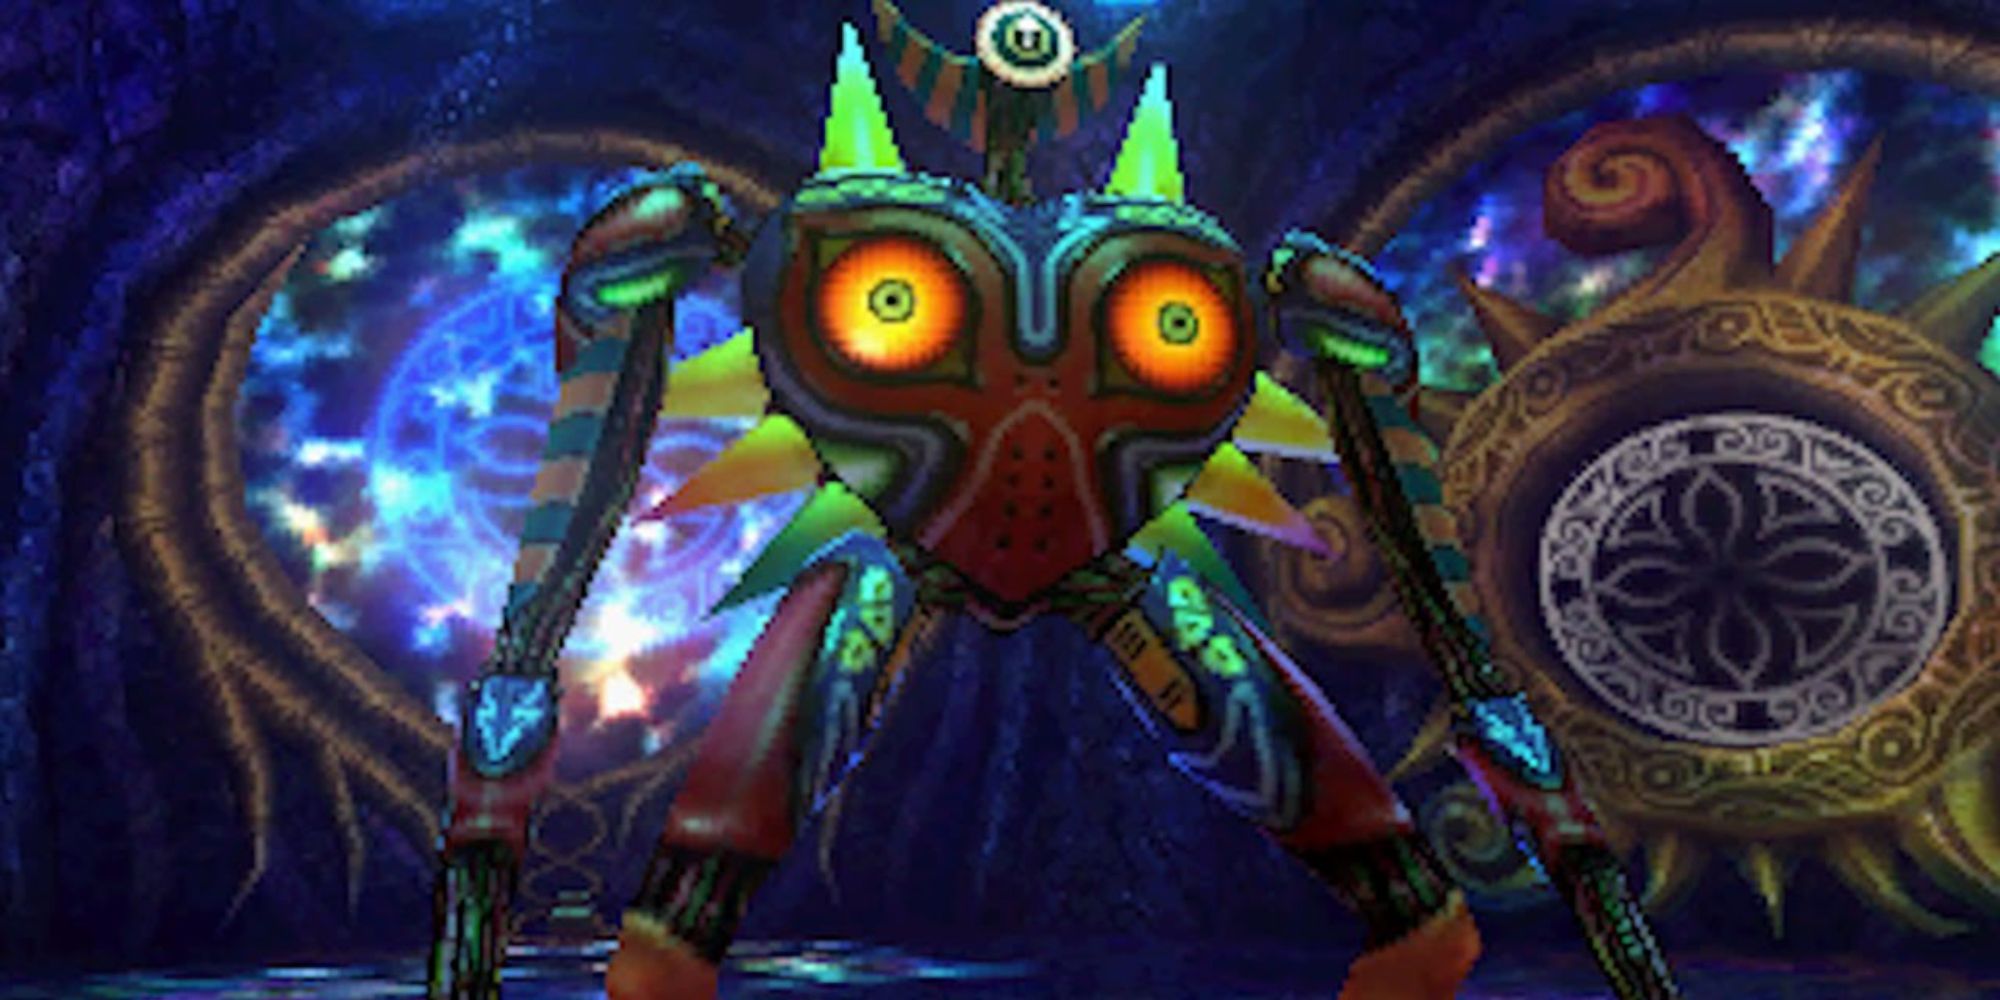 Majora's Mask personified